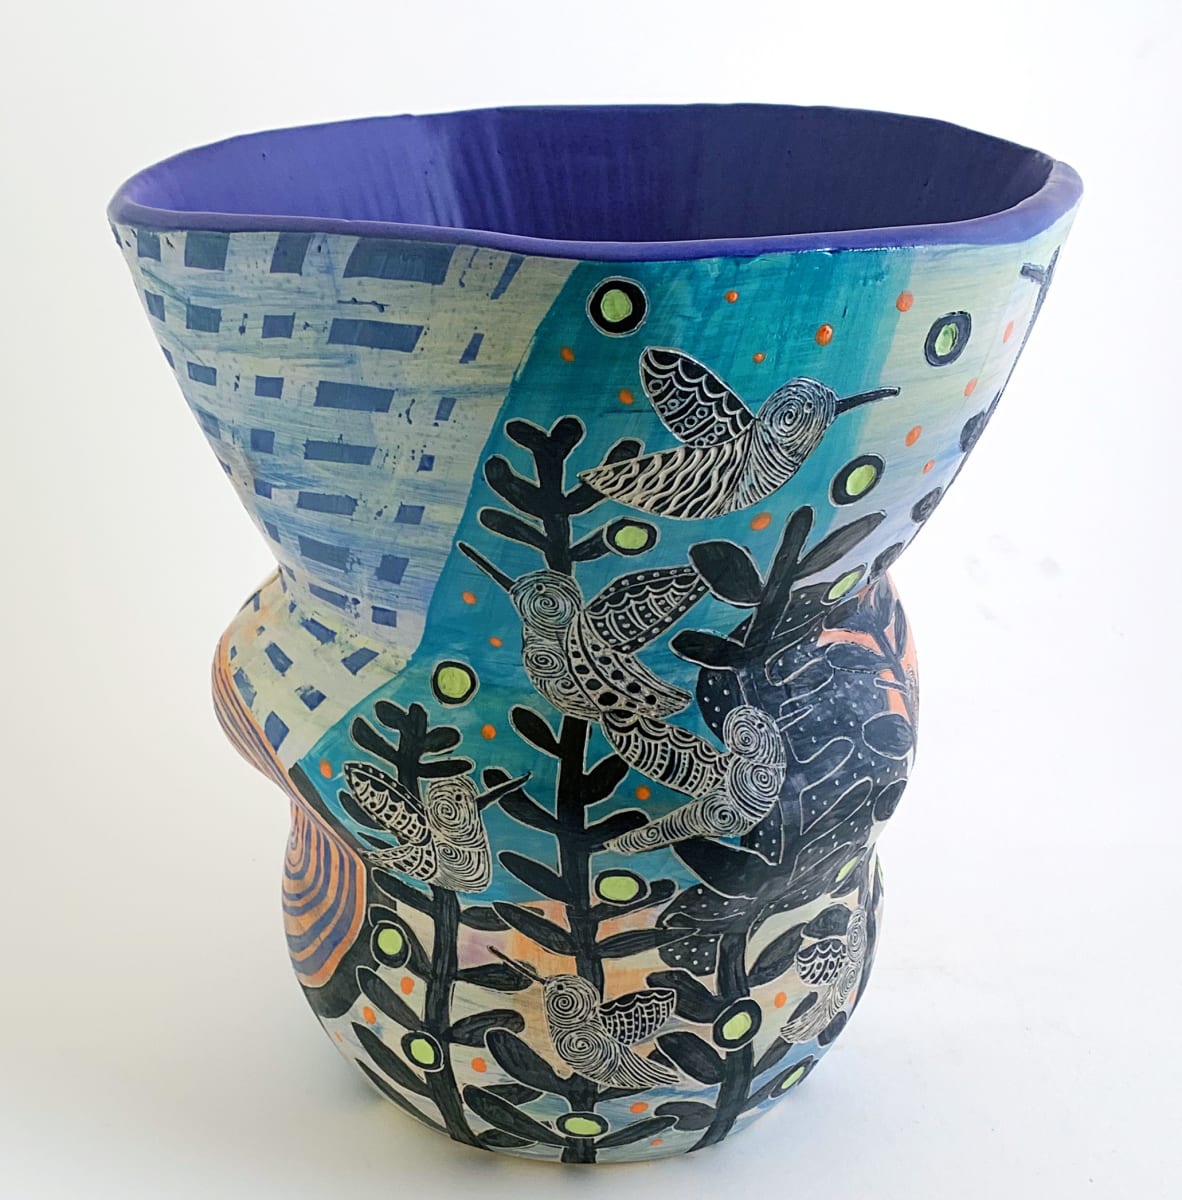 Garden Vessel - Showcase Piece  Image: Large stoneware vessel is a statement piece, all hand-made and one-of-a-kind. It features hand-etched decoration, color and pattern. Ready to display and also is a functioning vase.